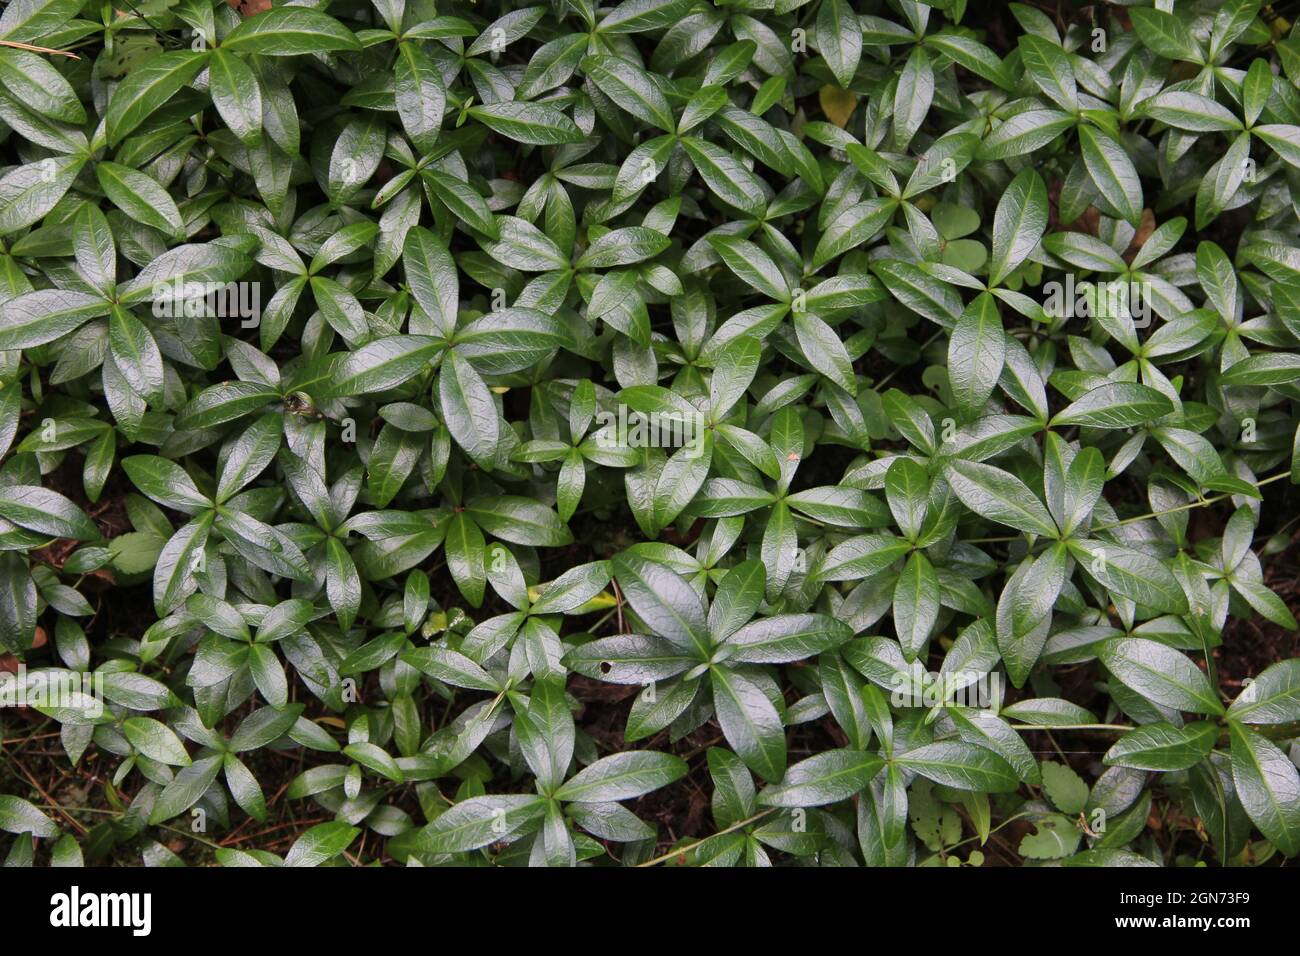 Many dark green glossy oval-shaped leaves of common periwinkle forming ground cover background in the garden in Lithuania Stock Photo